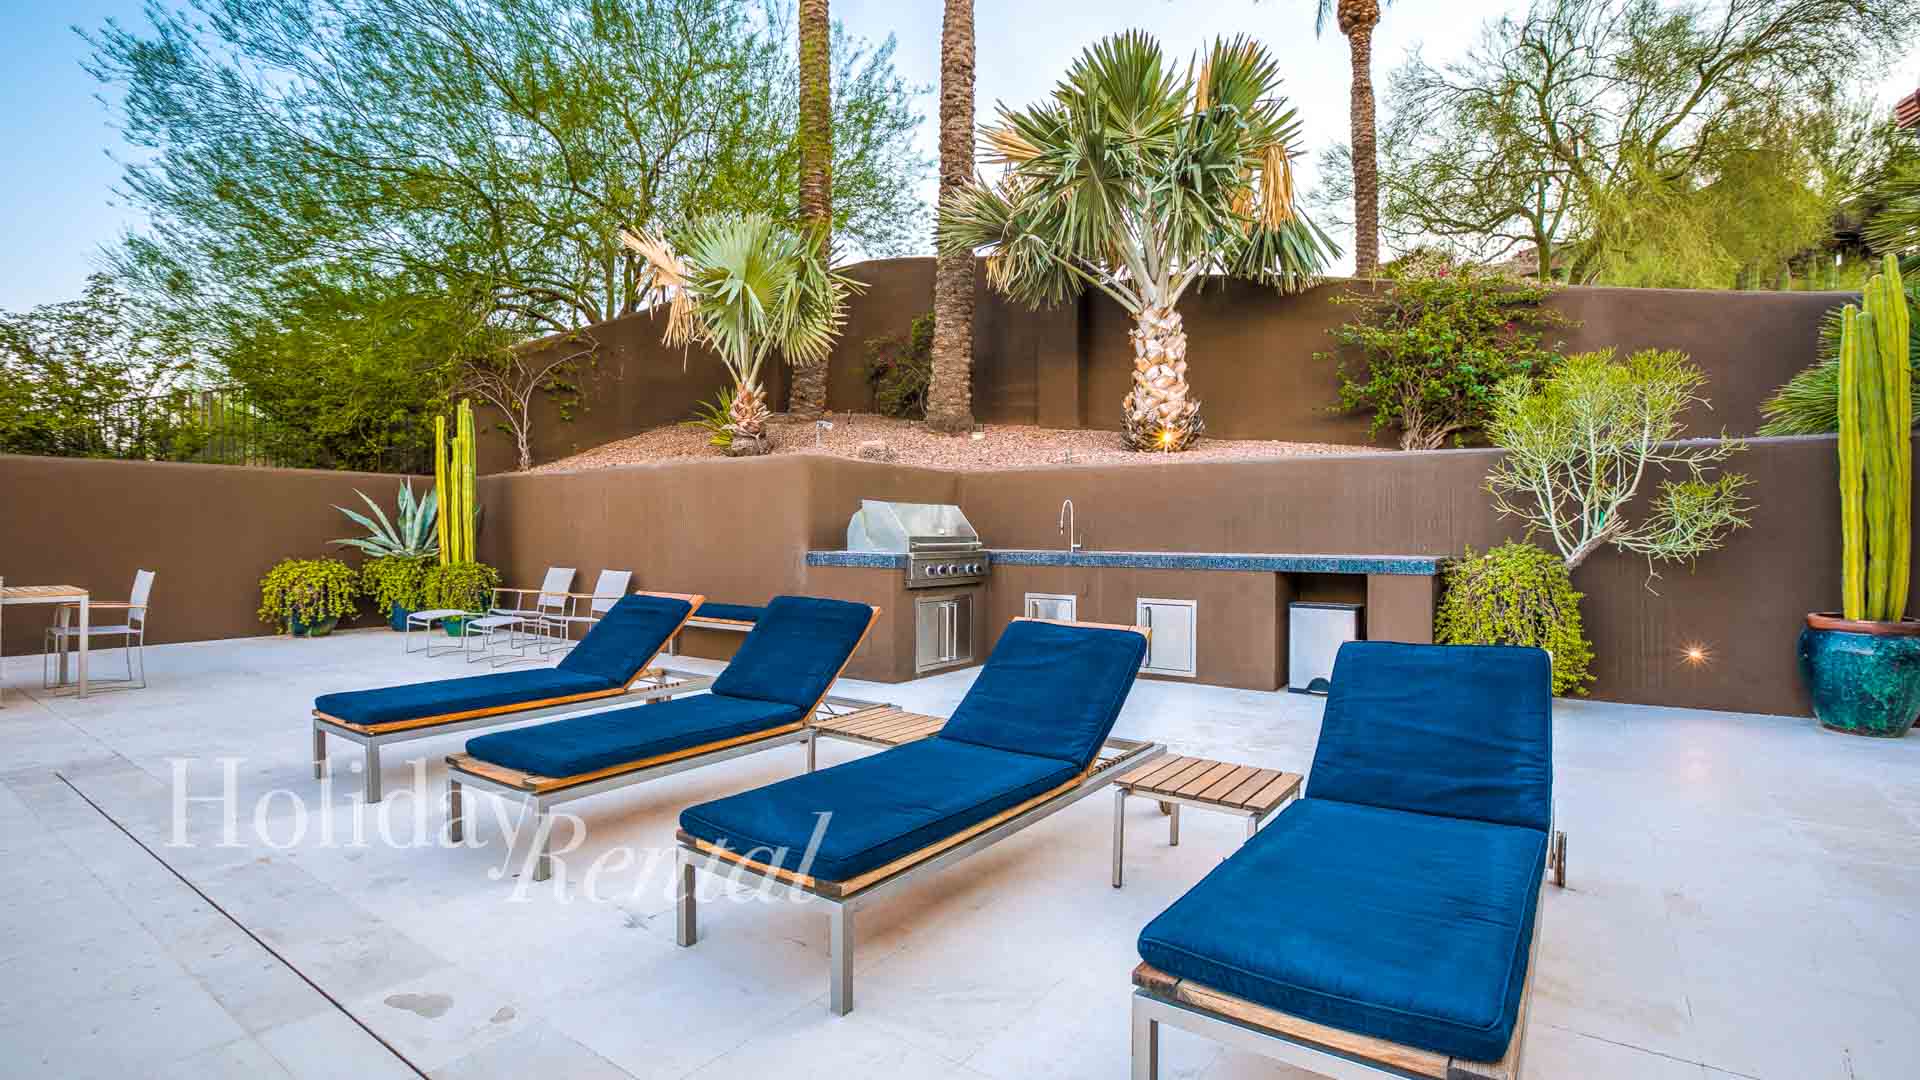 vacation rental pool side lounging